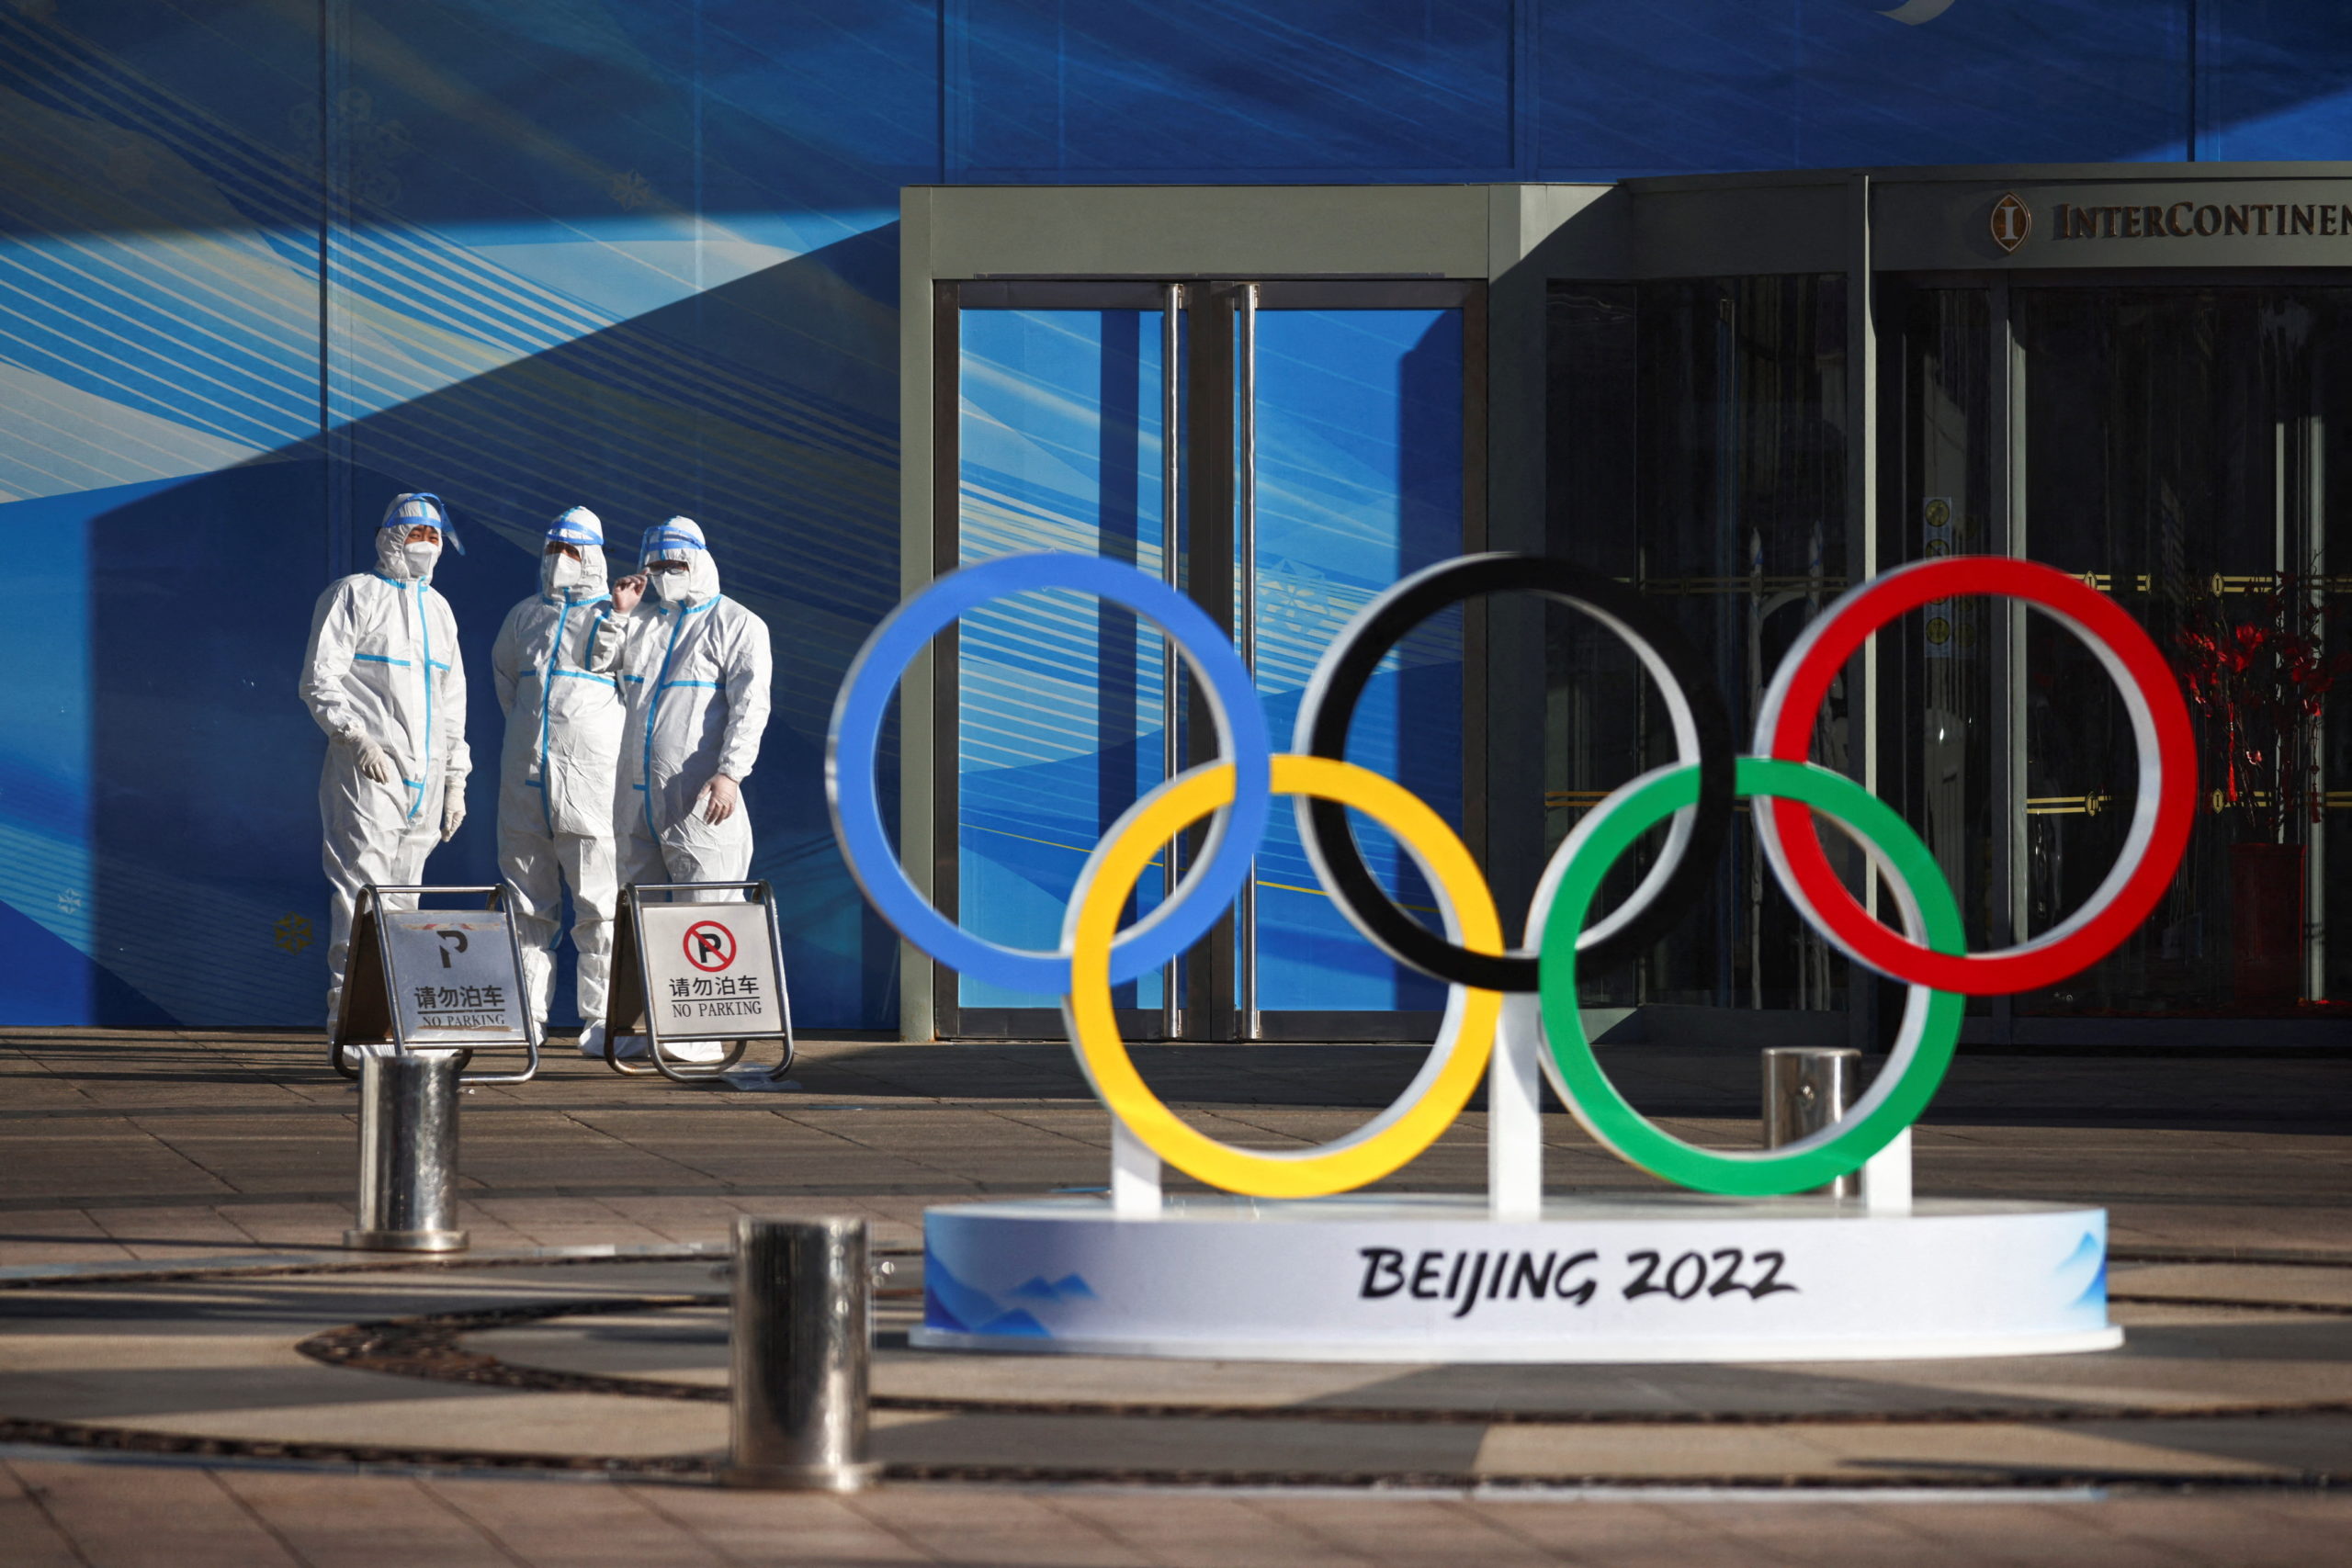 FILE PHOTO: Workers in PPE stand next to the Olympic rings inside the closed loop area near the National Stadium, or the Bird's Nest, where the opening and closing ceremonies of Beijing 2022 Winter Olympics will be held, in Beijing, China December 30, 2021. REUTERS/Thomas Peter